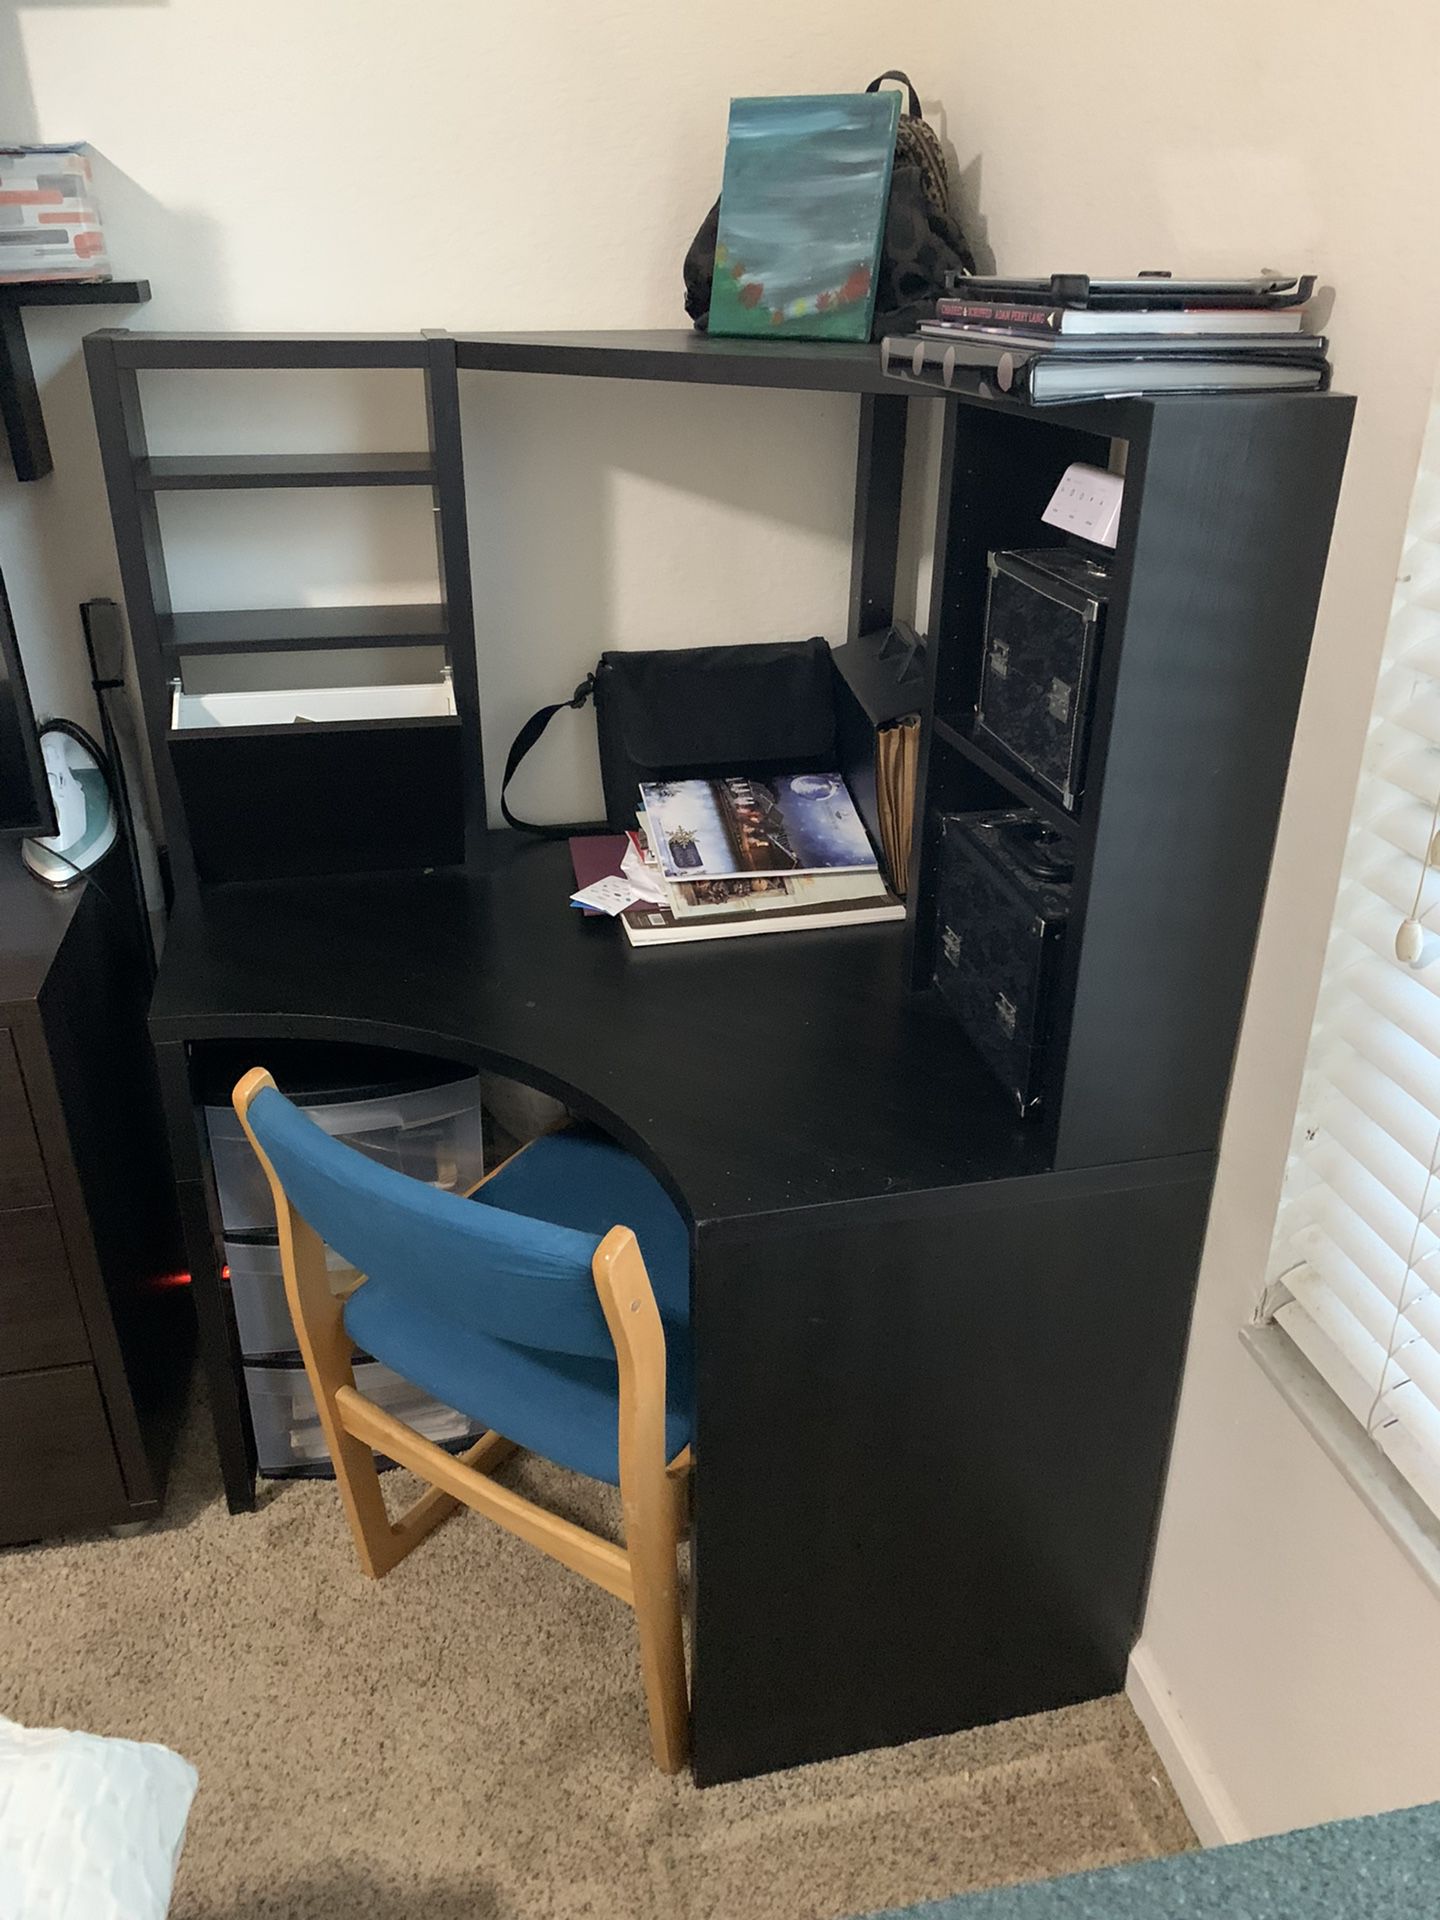 Desk And Chair $65 For All🎄🎈🎄 House And Office Furniture, Furniture, Student Desk, College Desk, Homework Desk, Black, Sell, Garage sell, Organizer